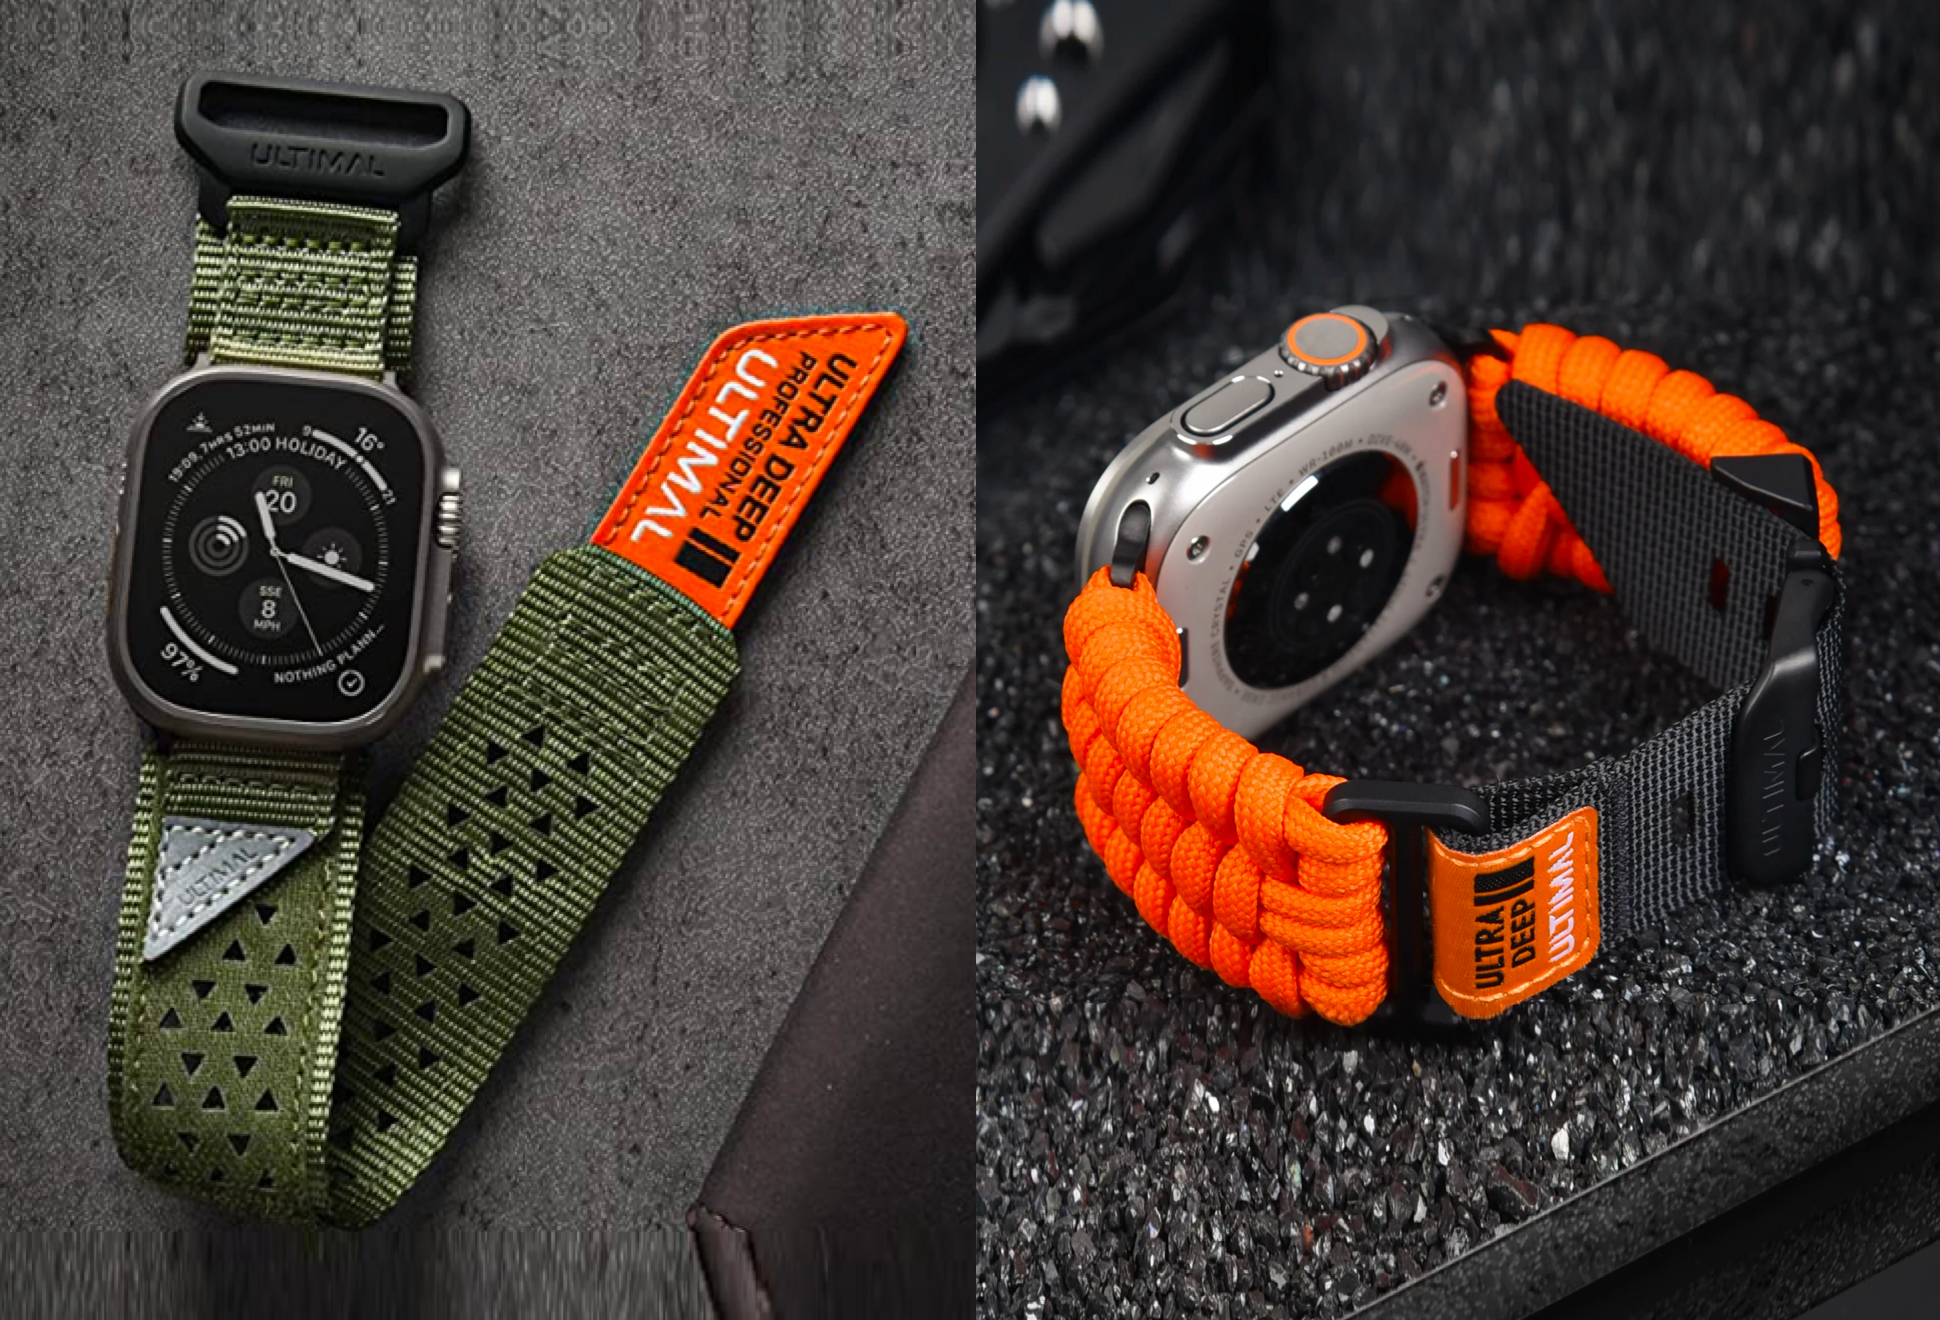 RelÓgio Ultimal Apple Watch Bands - Image